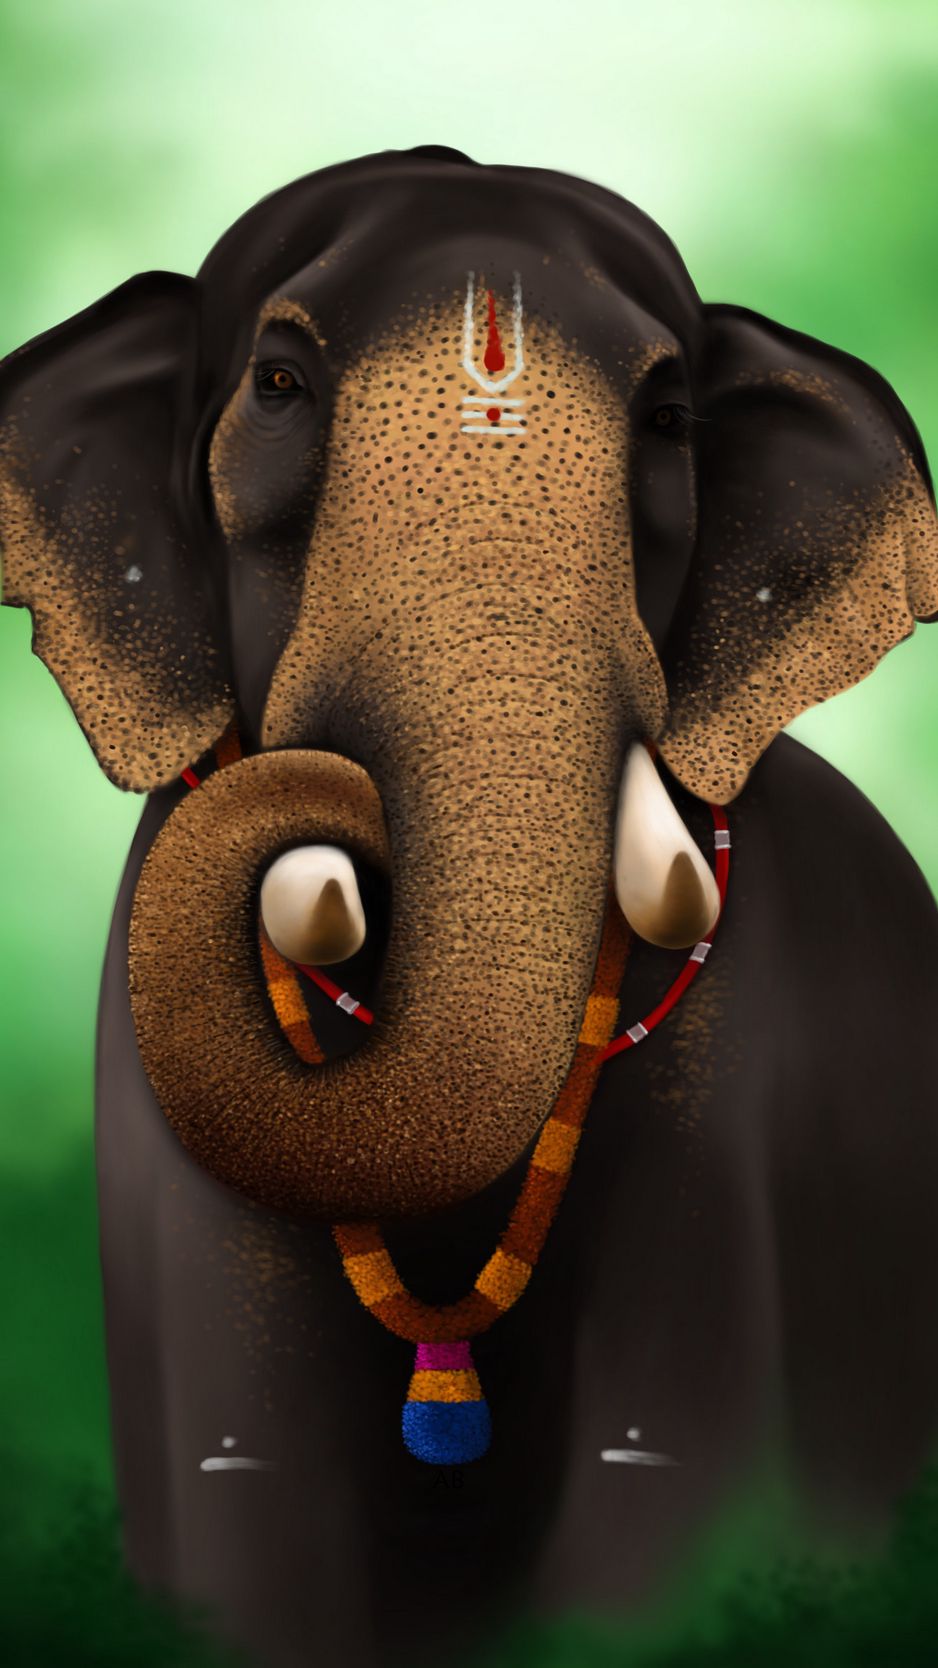 Download wallpaper 938x1668 elephant, indian, animal, art iphone 8/7/6s/6  for parallax hd background